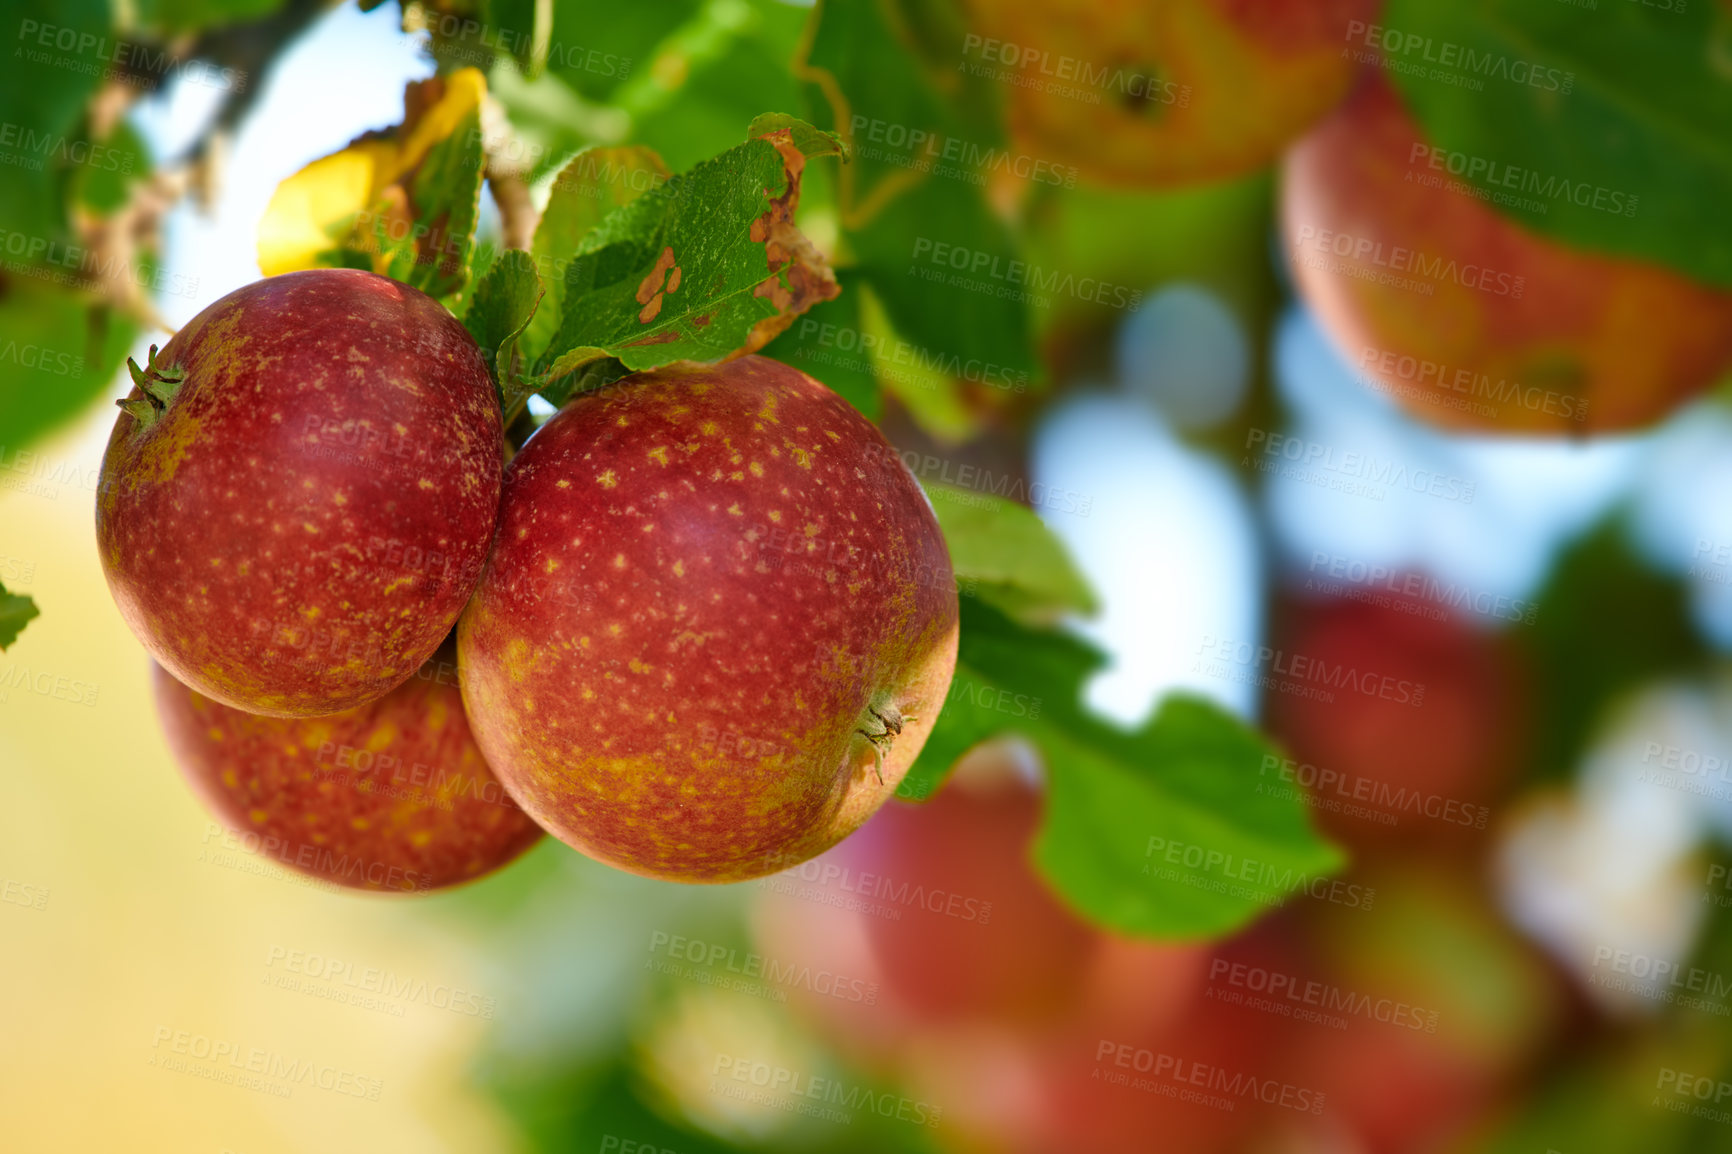 Buy stock photo Ripe red apples on a tree with green leaves from below. Organic and healthy fruit growing on an orchard tree branch on a sustainable farm in summer. Group of fresh seasonal produce ready for harvest